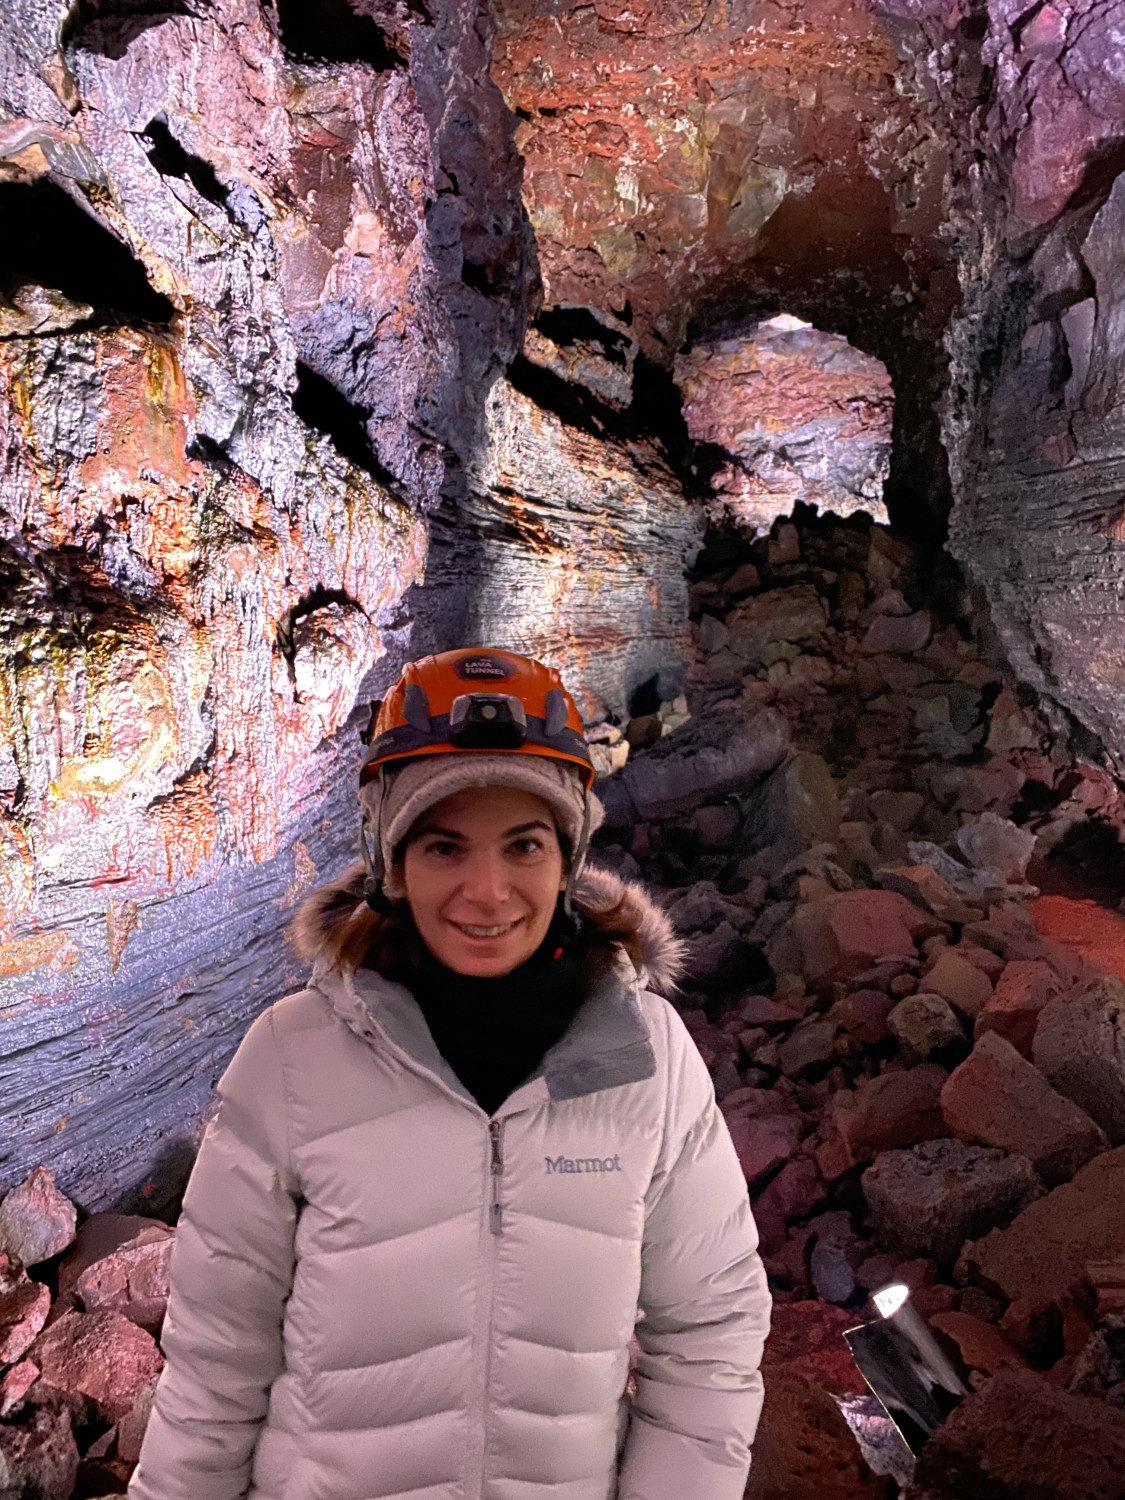 Travel advisor posing in a cave